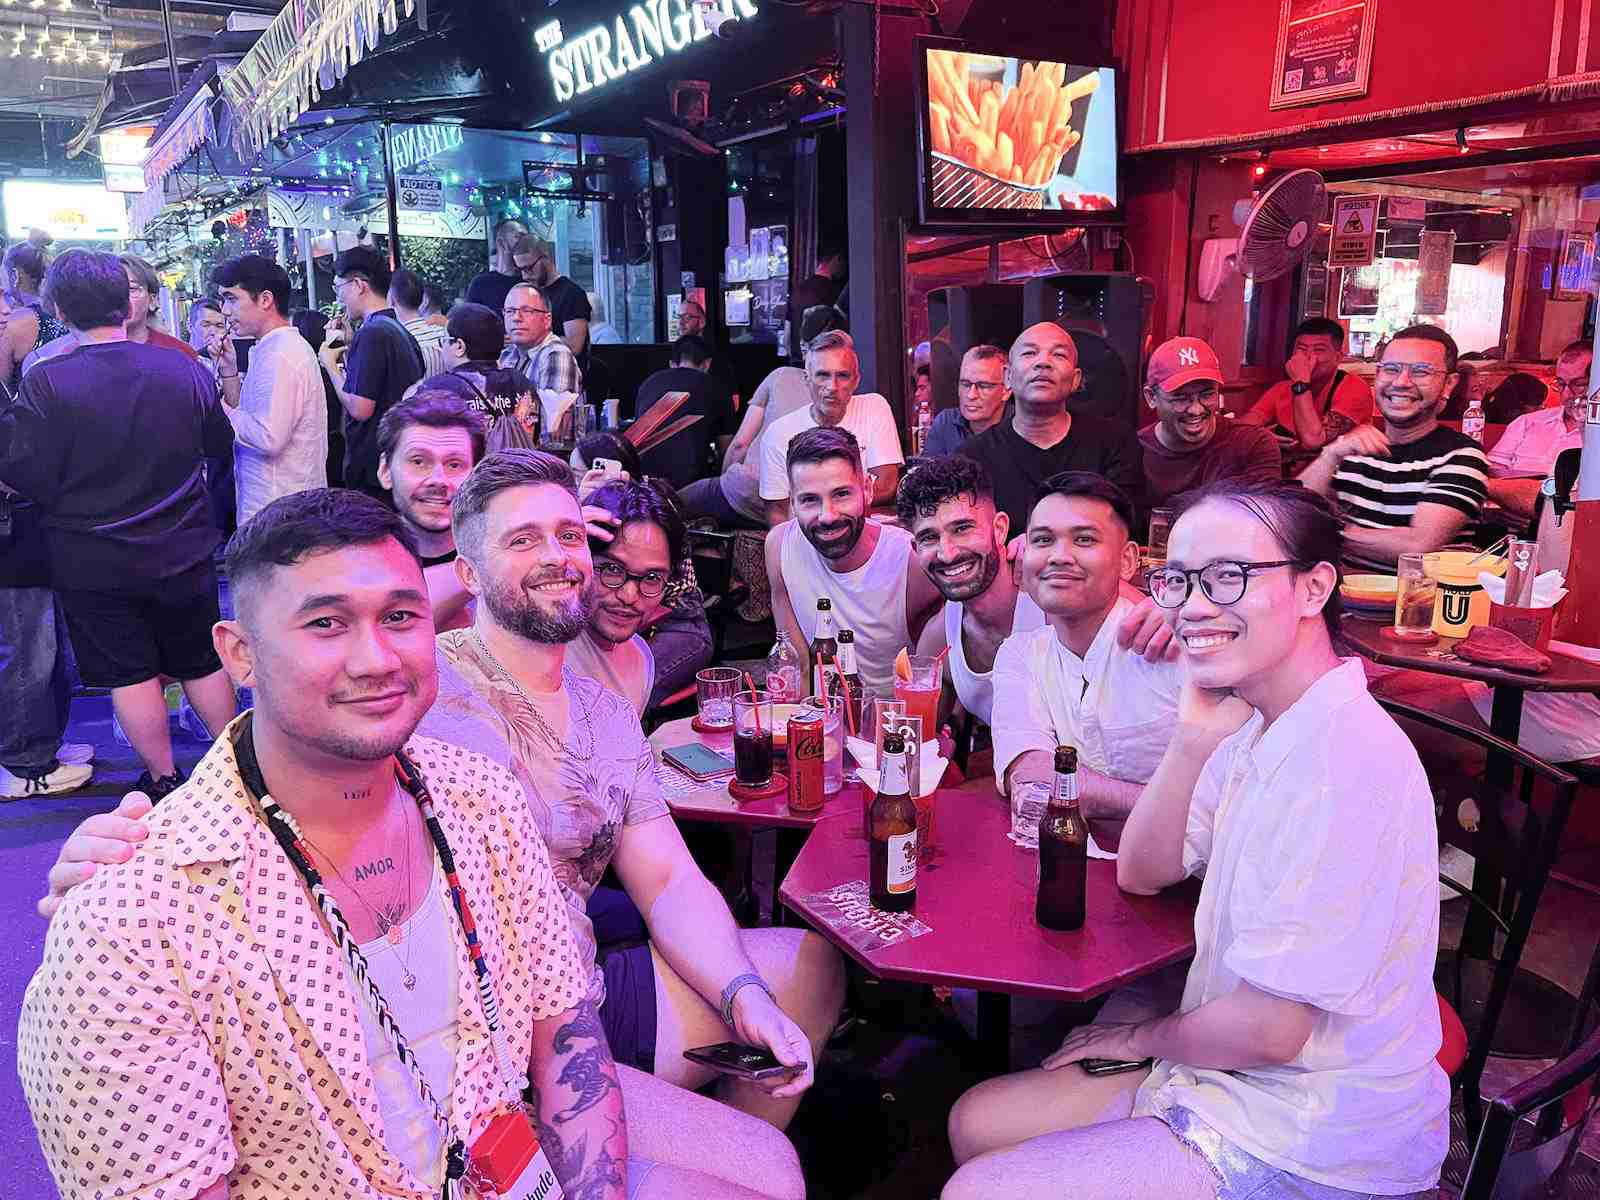 Seby and Stefan with group of gay friends at Circus gay bar in the Silom gay neighborhood of Bangkok.